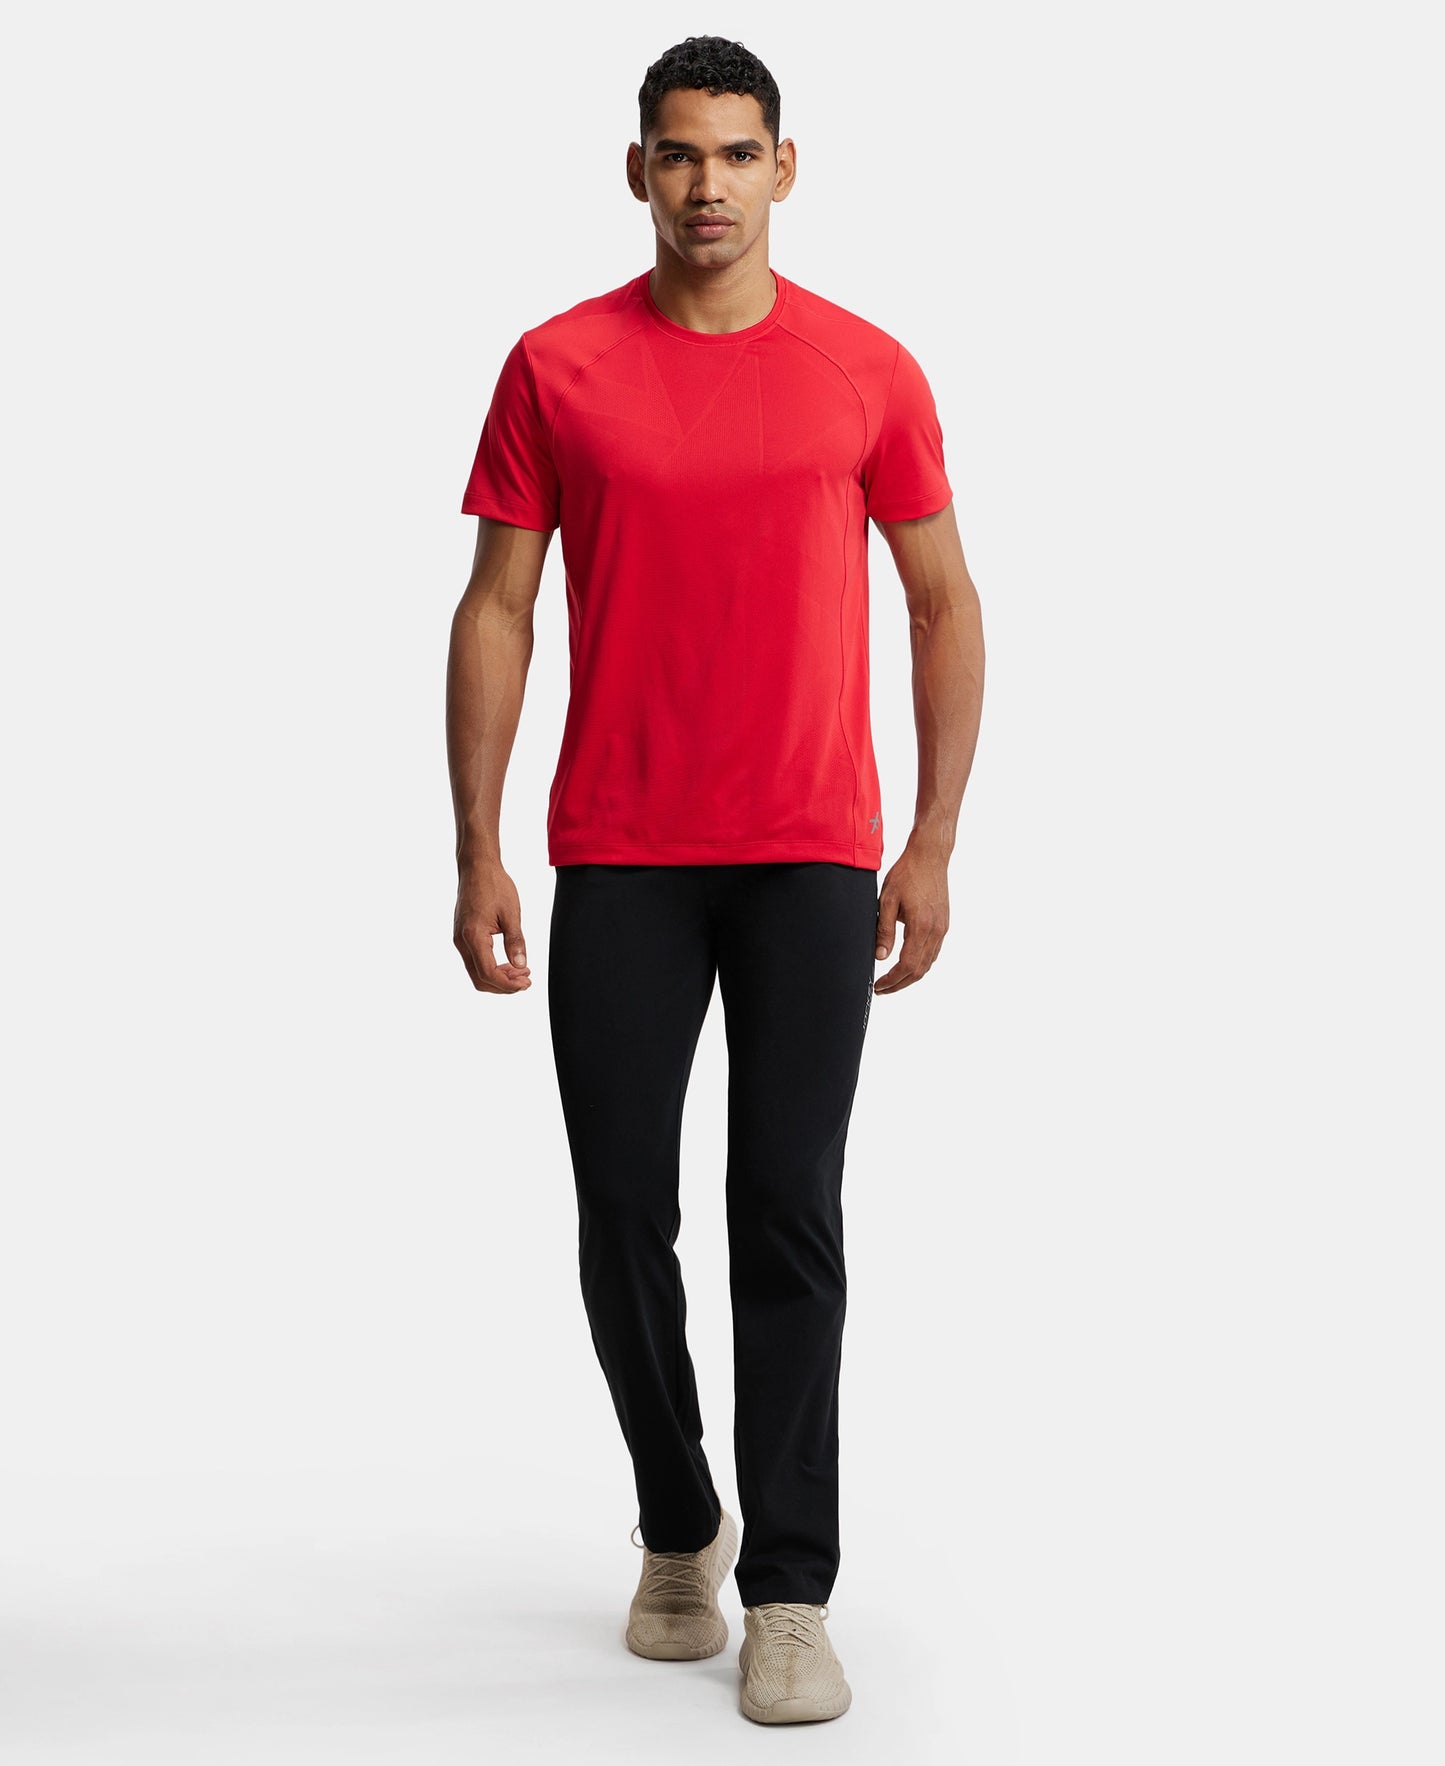 Microfiber Fabric Round Neck Half Sleeve T-Shirt with Breathable Mesh - Team Red-4